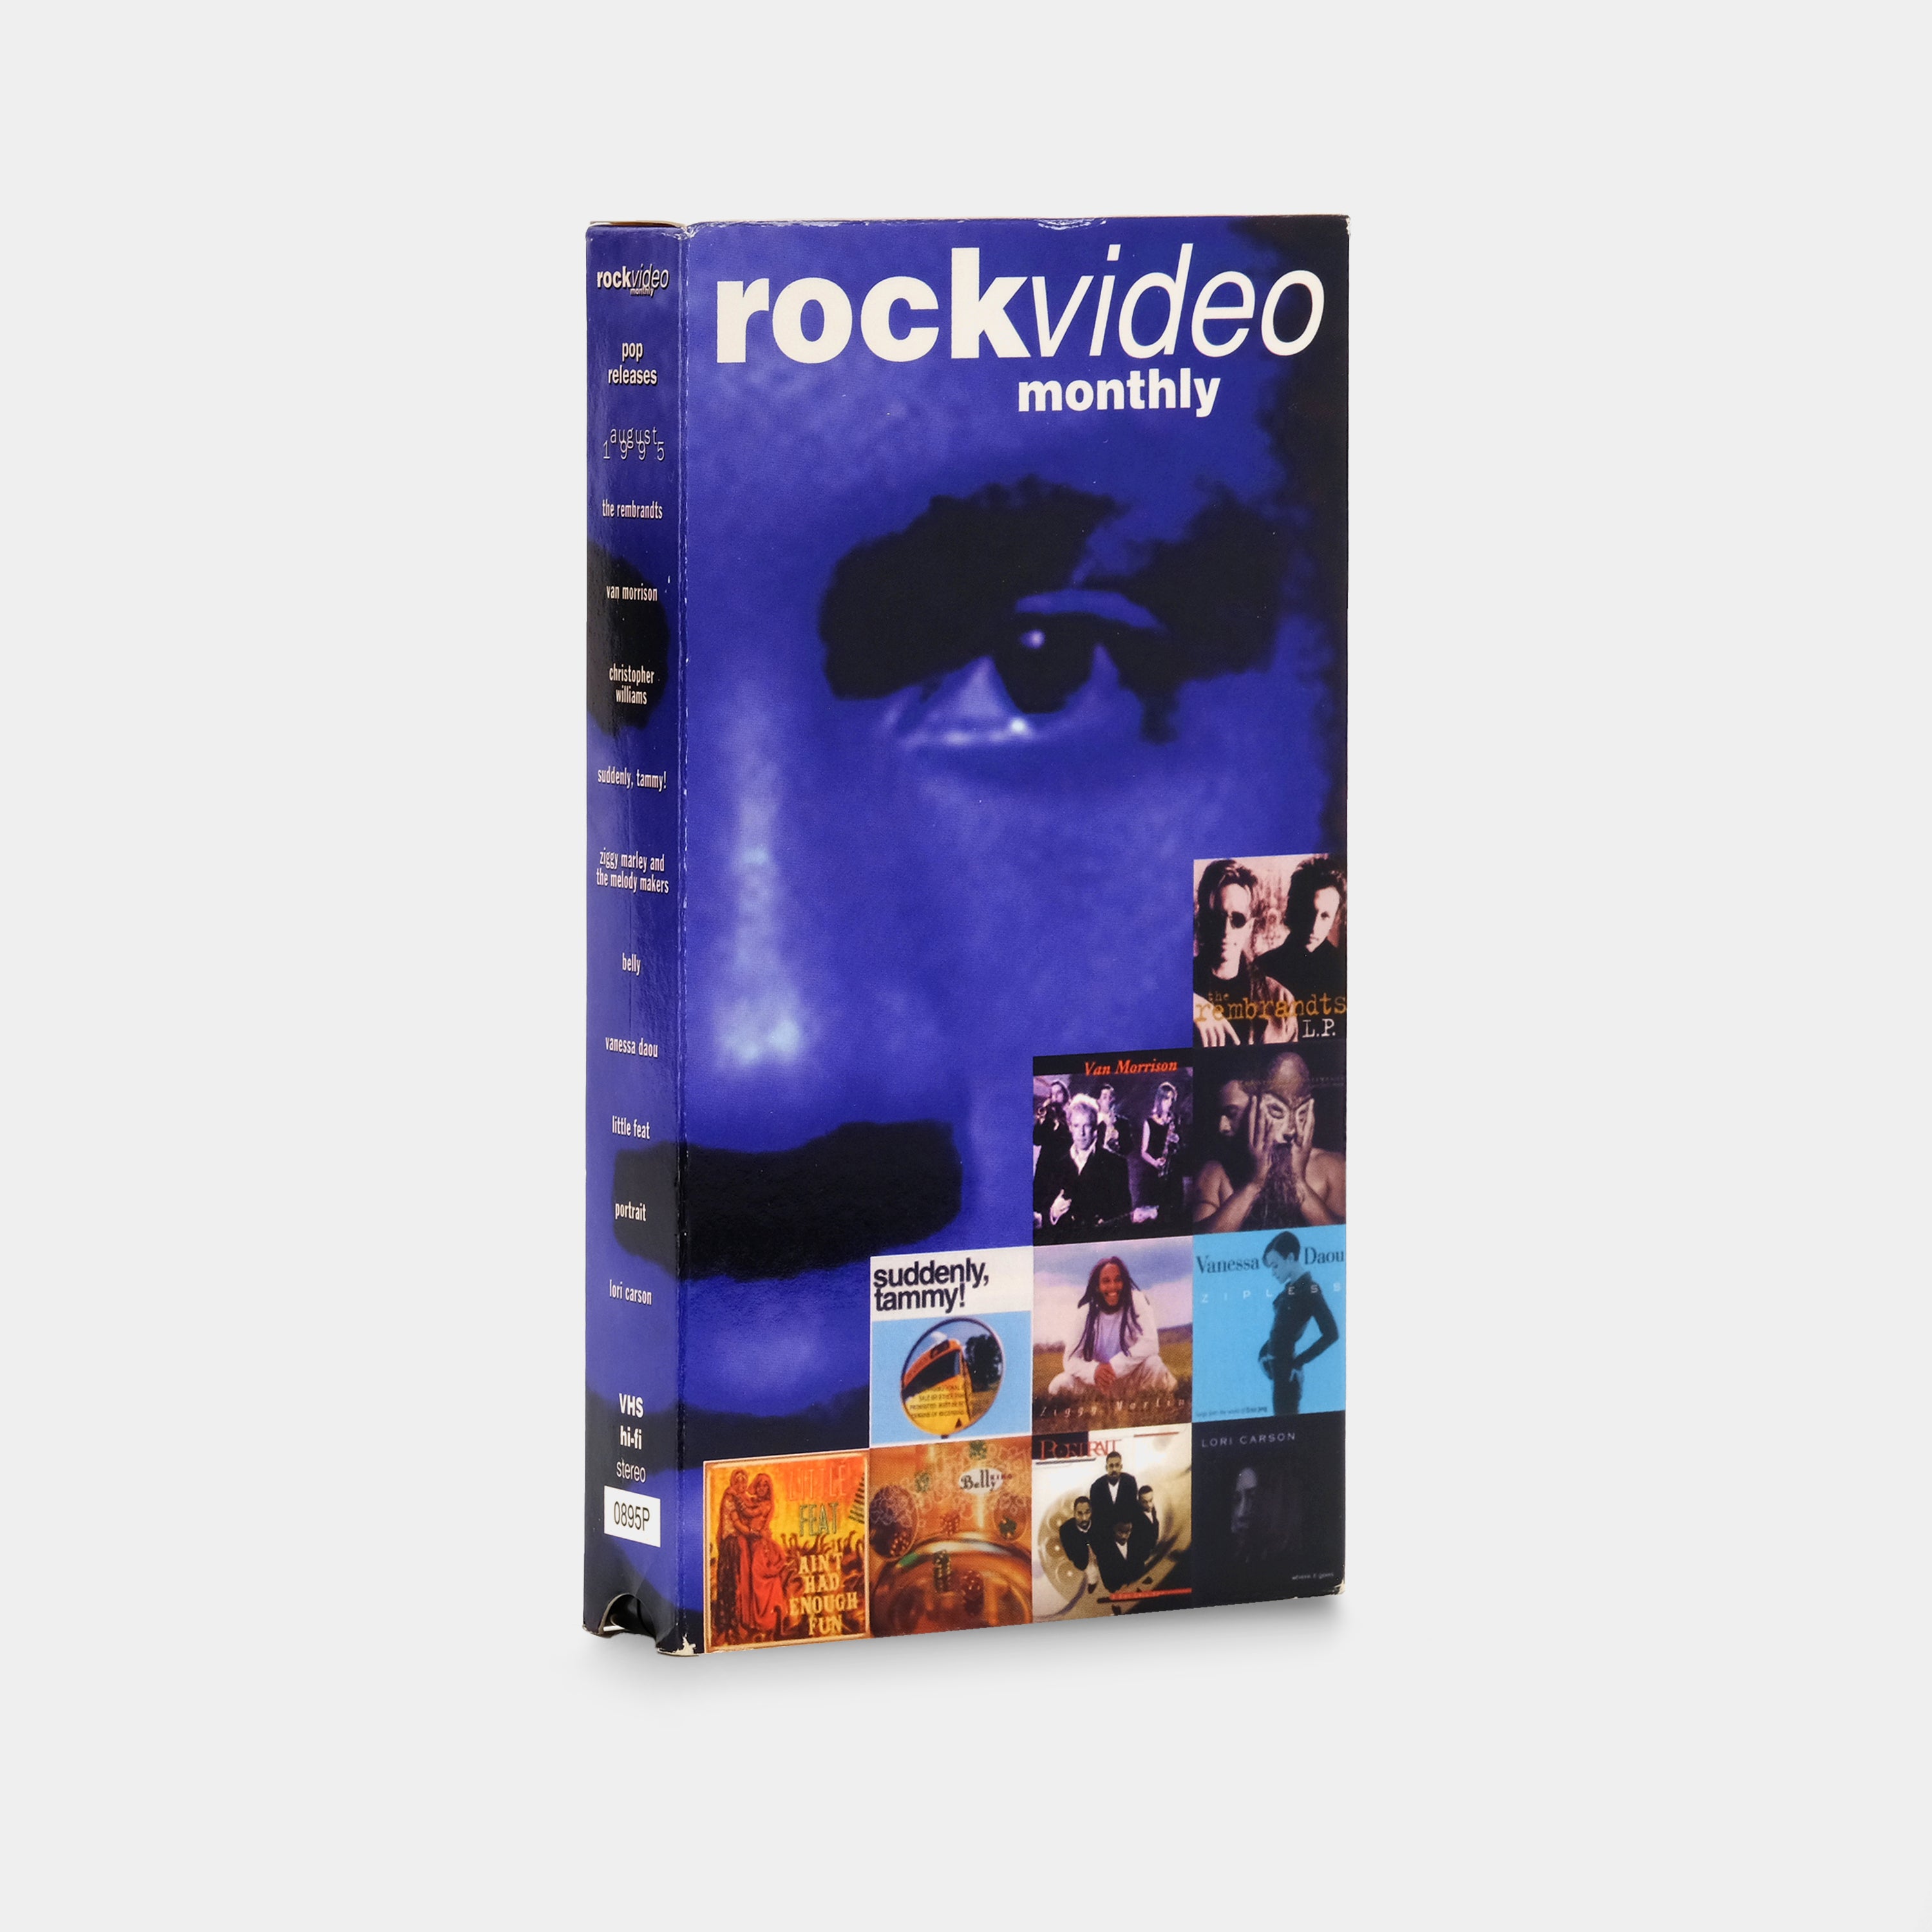 RockVideo Monthly - Pop Releases August 1995 VHS Tape